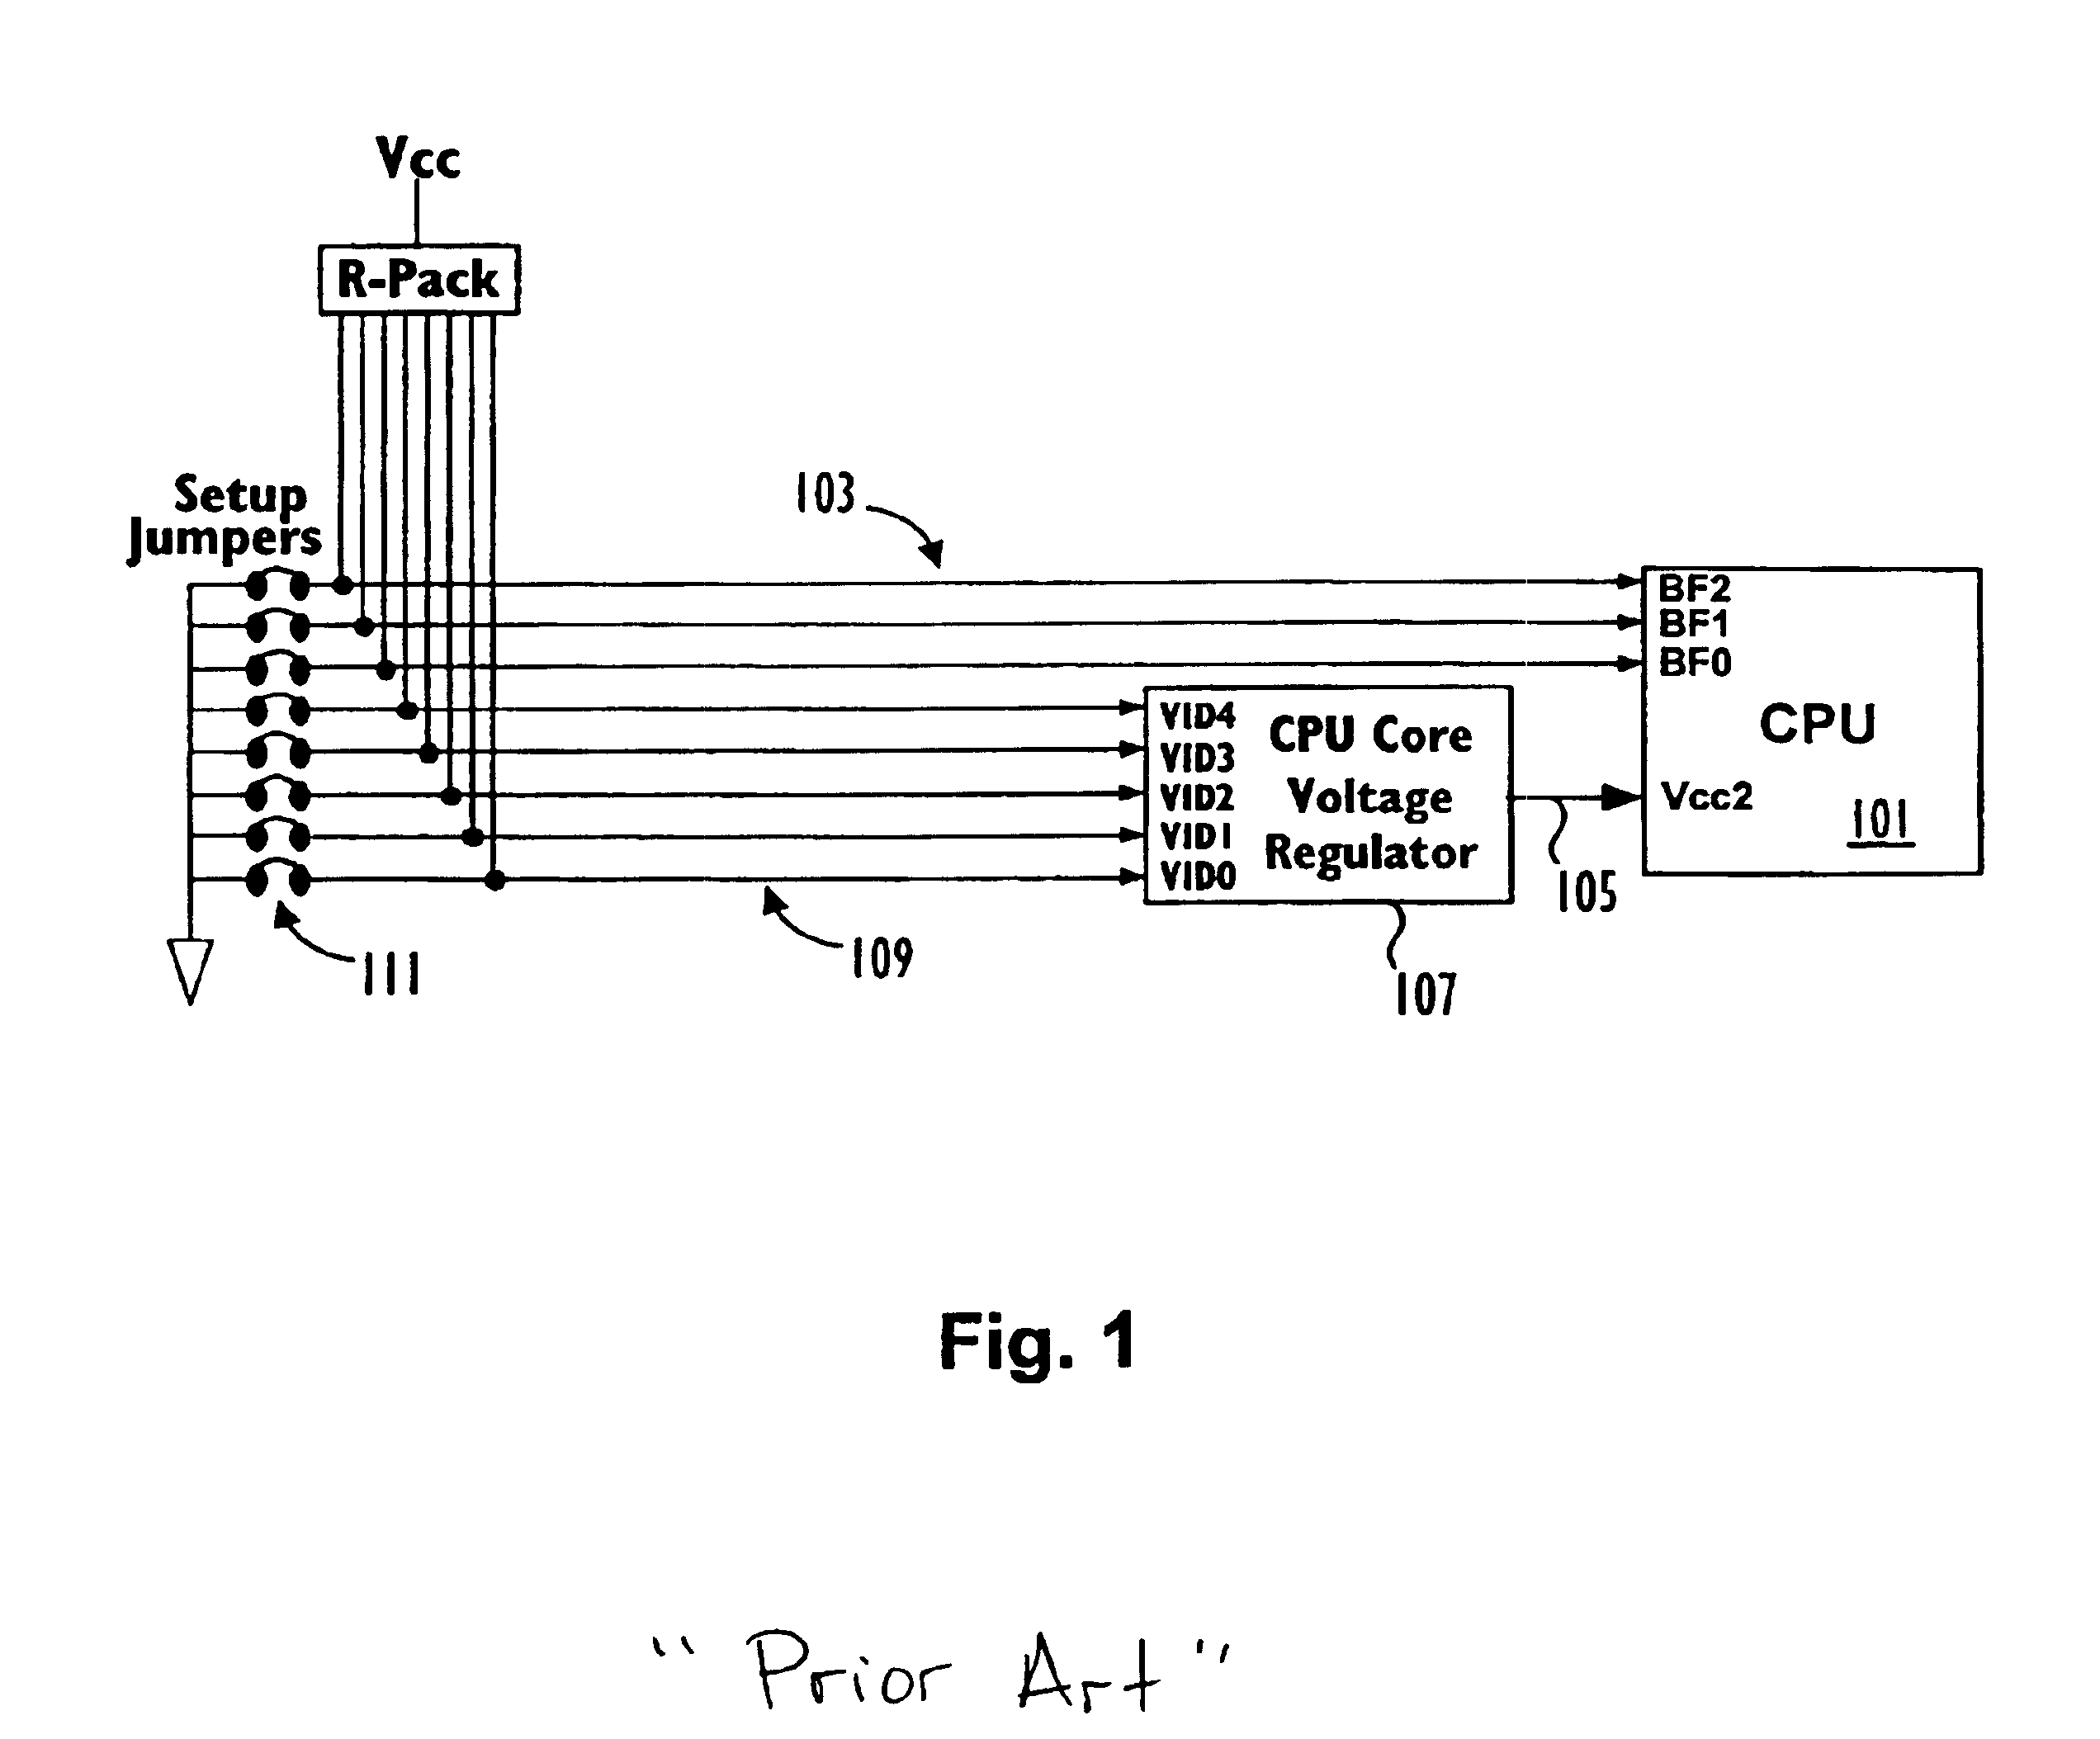 Integrated circuit package incorporating programmable elements